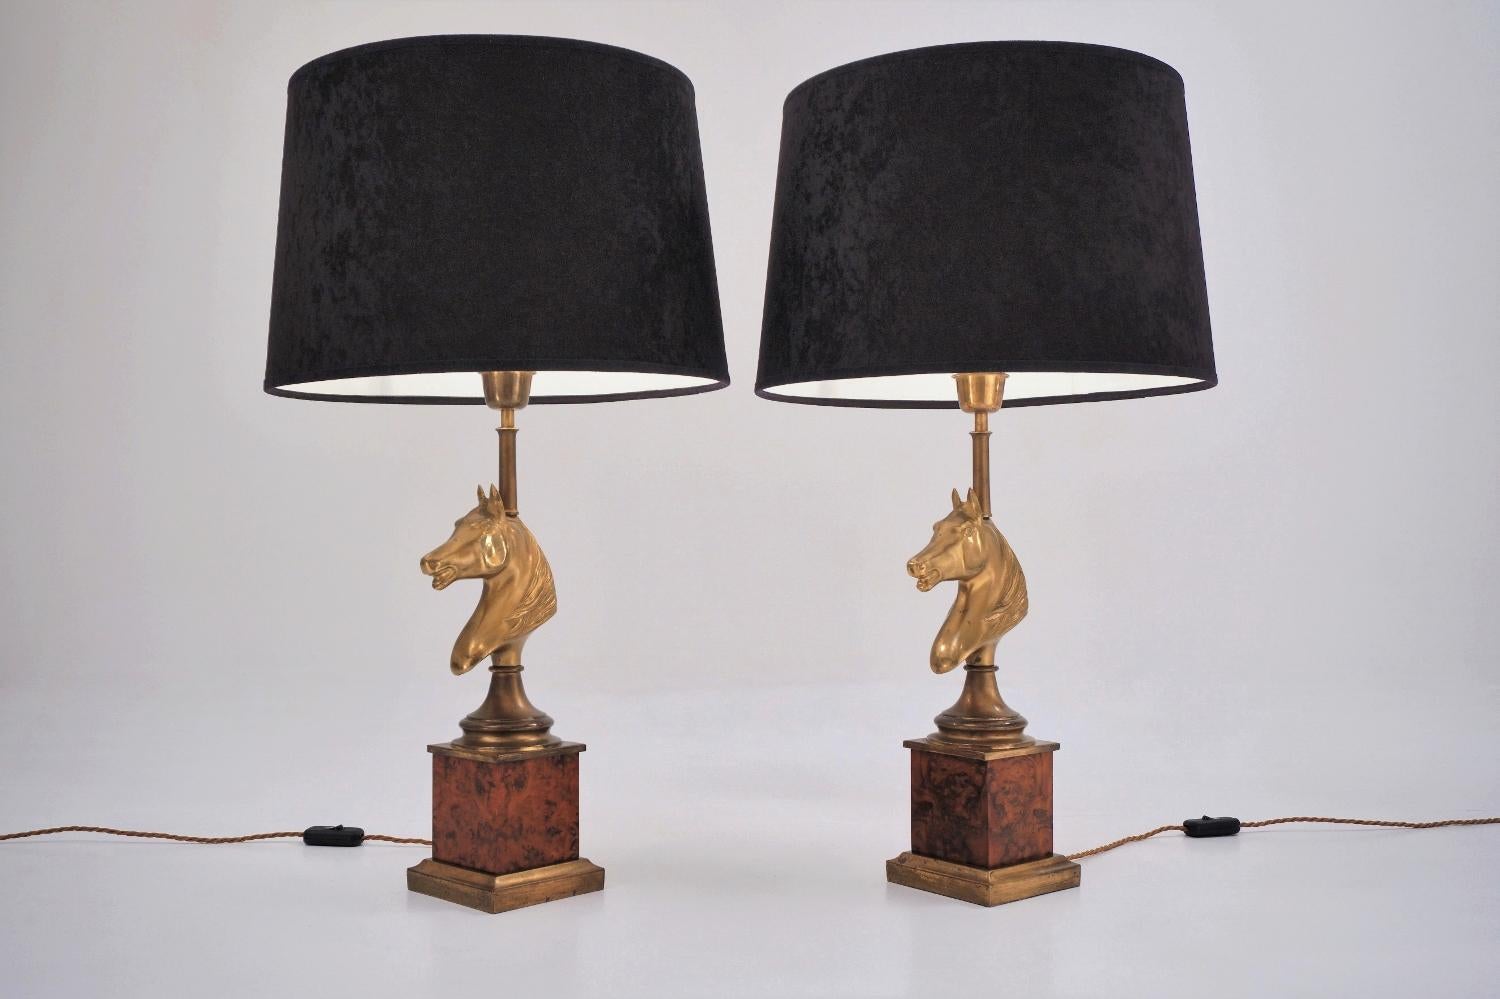 Maison Charles Horse Lamps Pair of Brass & Burl Walnut, circa 1970s, French 1